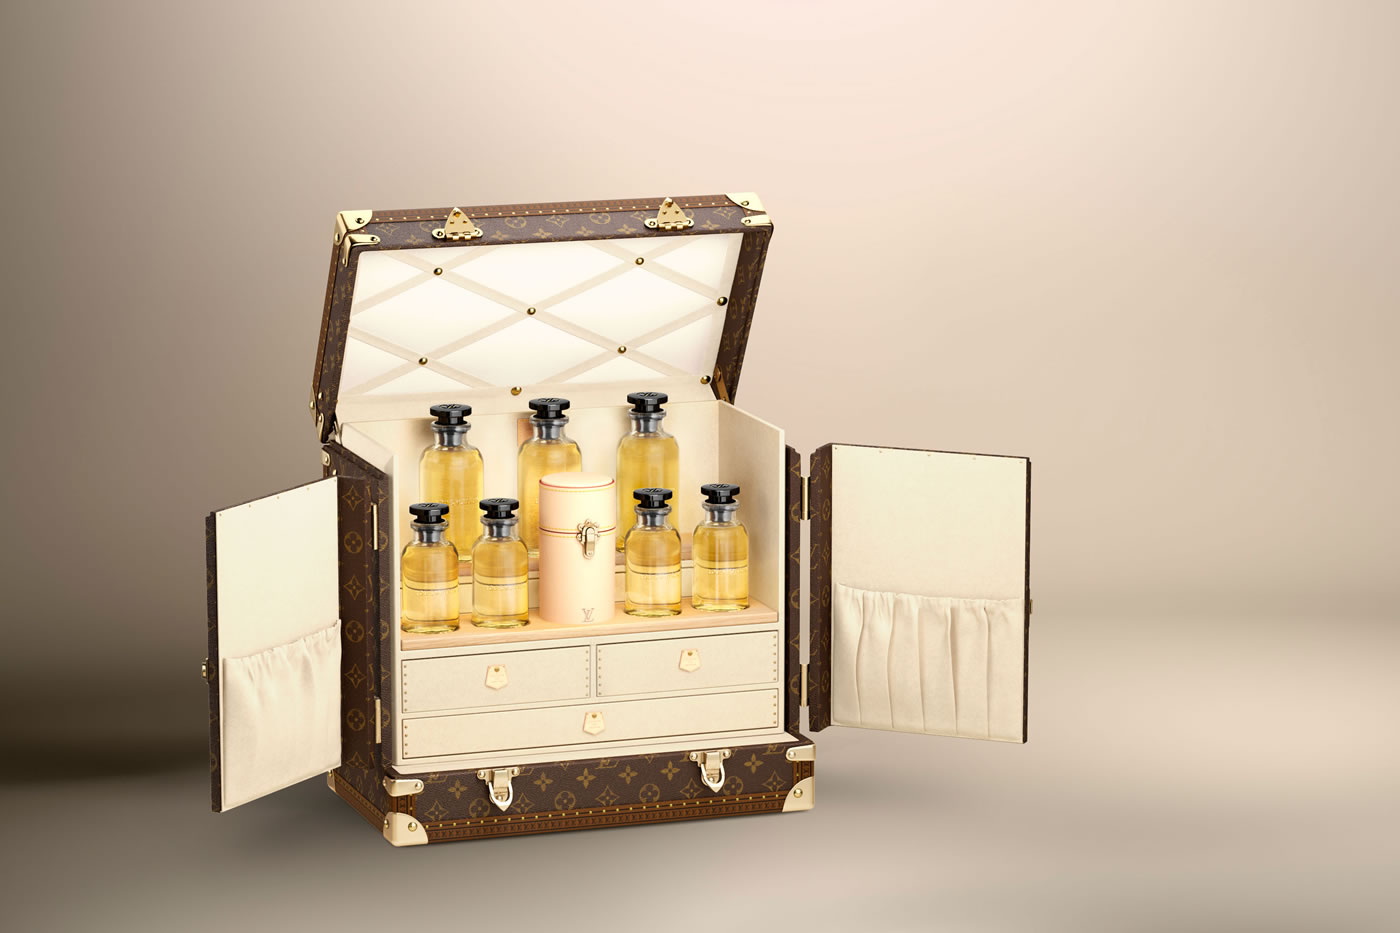 Louis Vuitton adds a new addition to its fragrance trunk